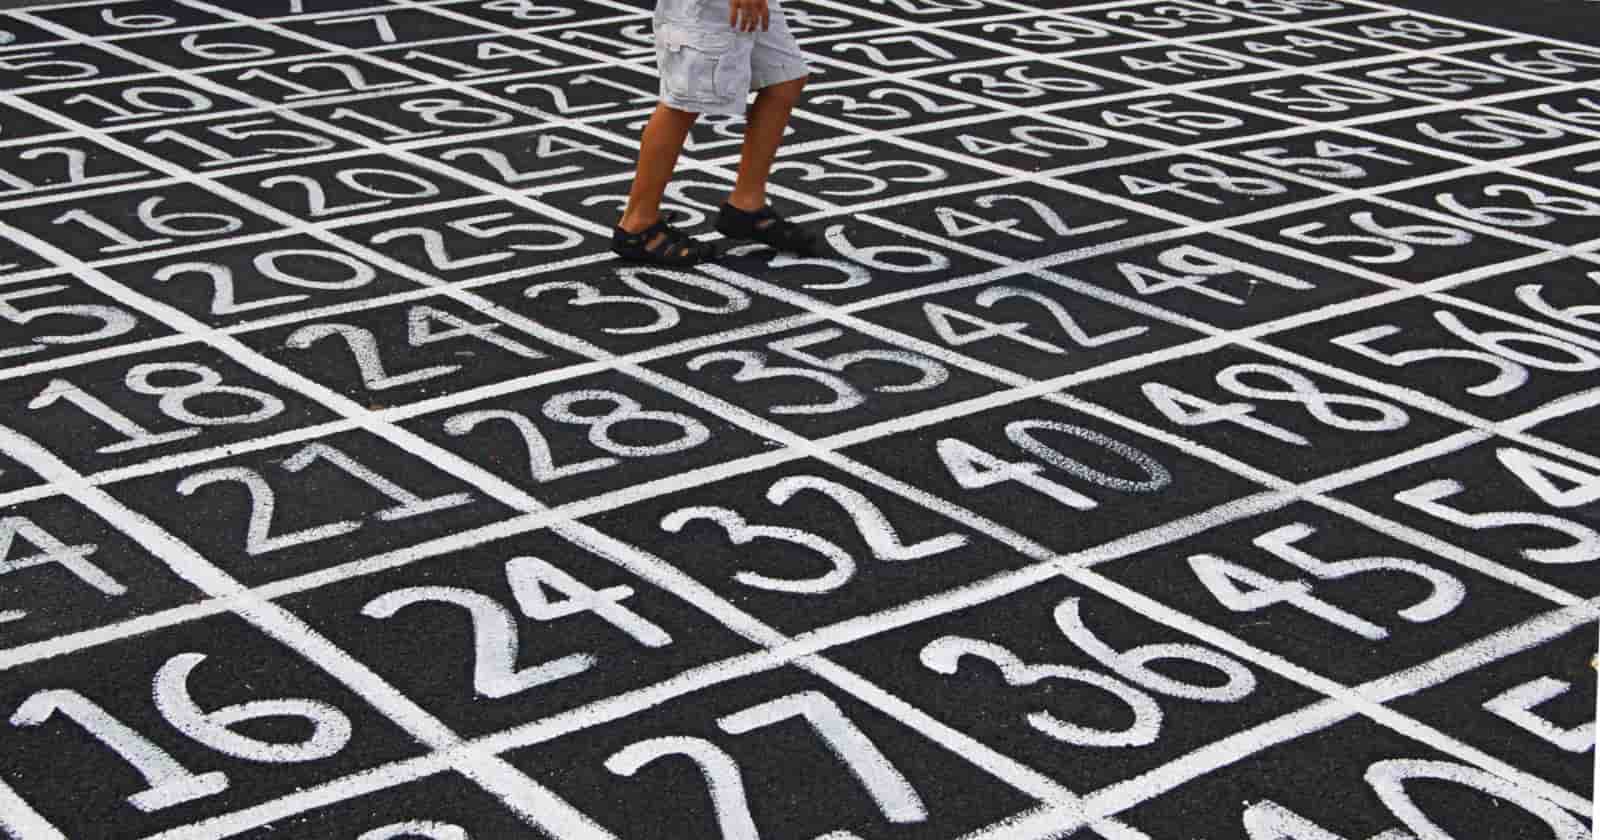 Man walking over lottery numbers